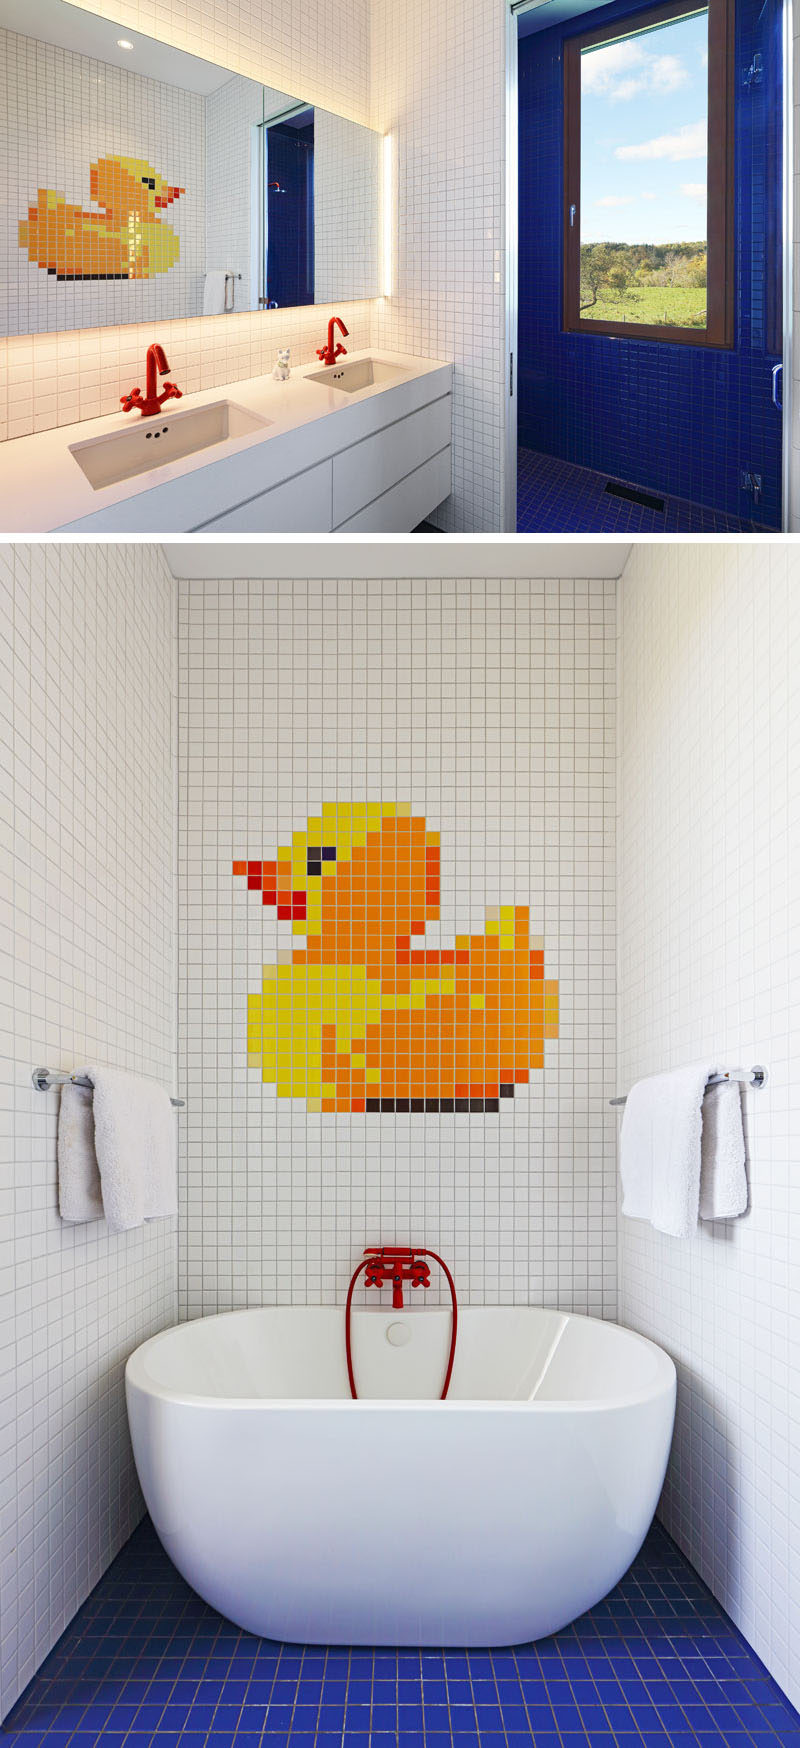 In this modern bathroom, playful touches have been added in the form of a rubber ducky tile mosaic and red faucets. #ModernBathroom #BathroomDesign